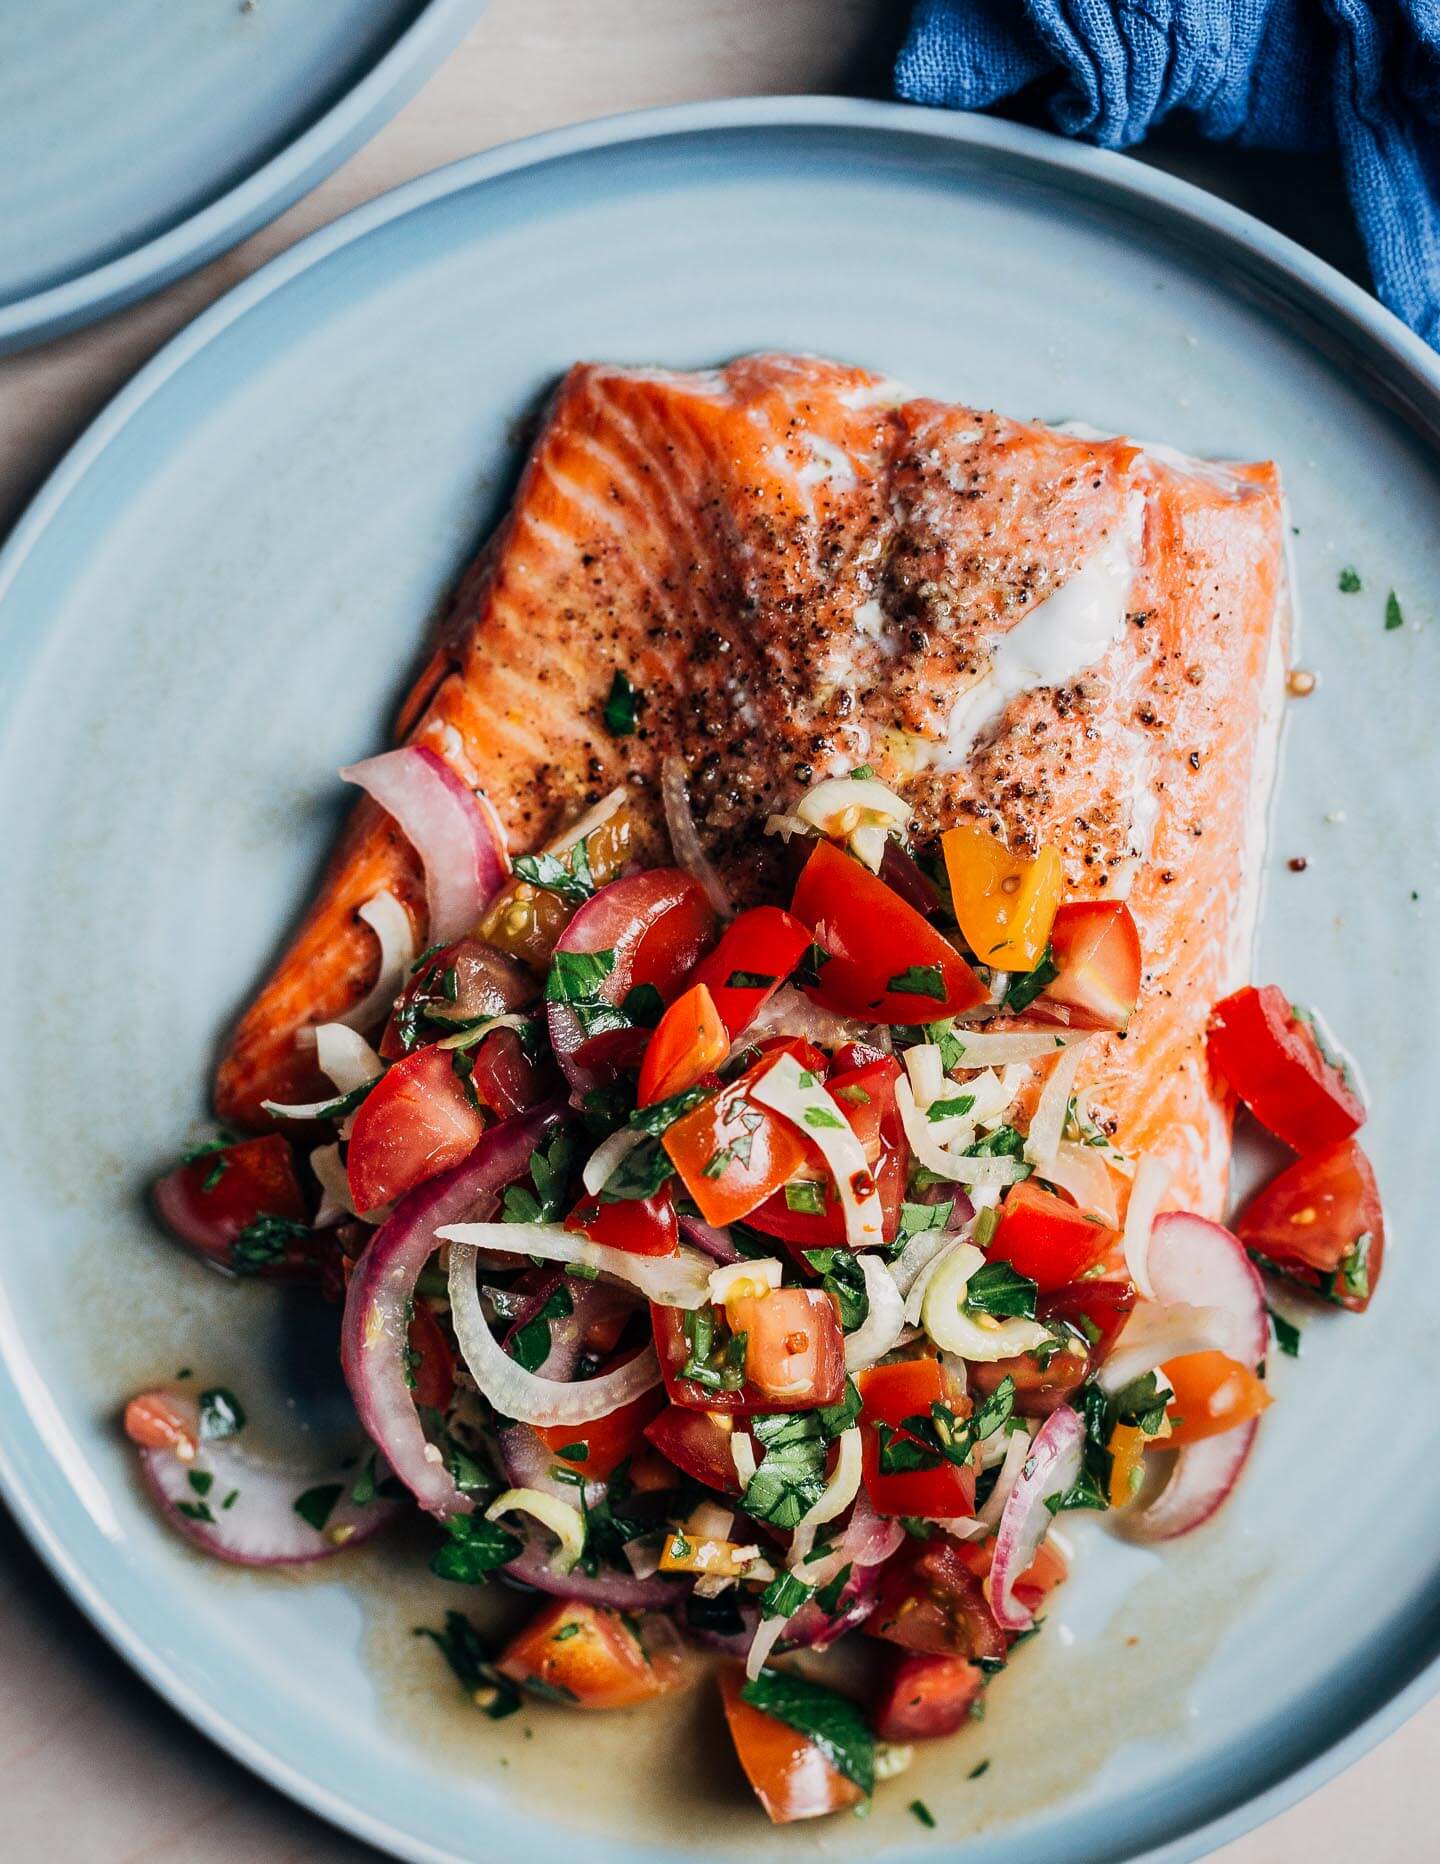 A salmon filet on a plate topped with a tomato and fennel salad.